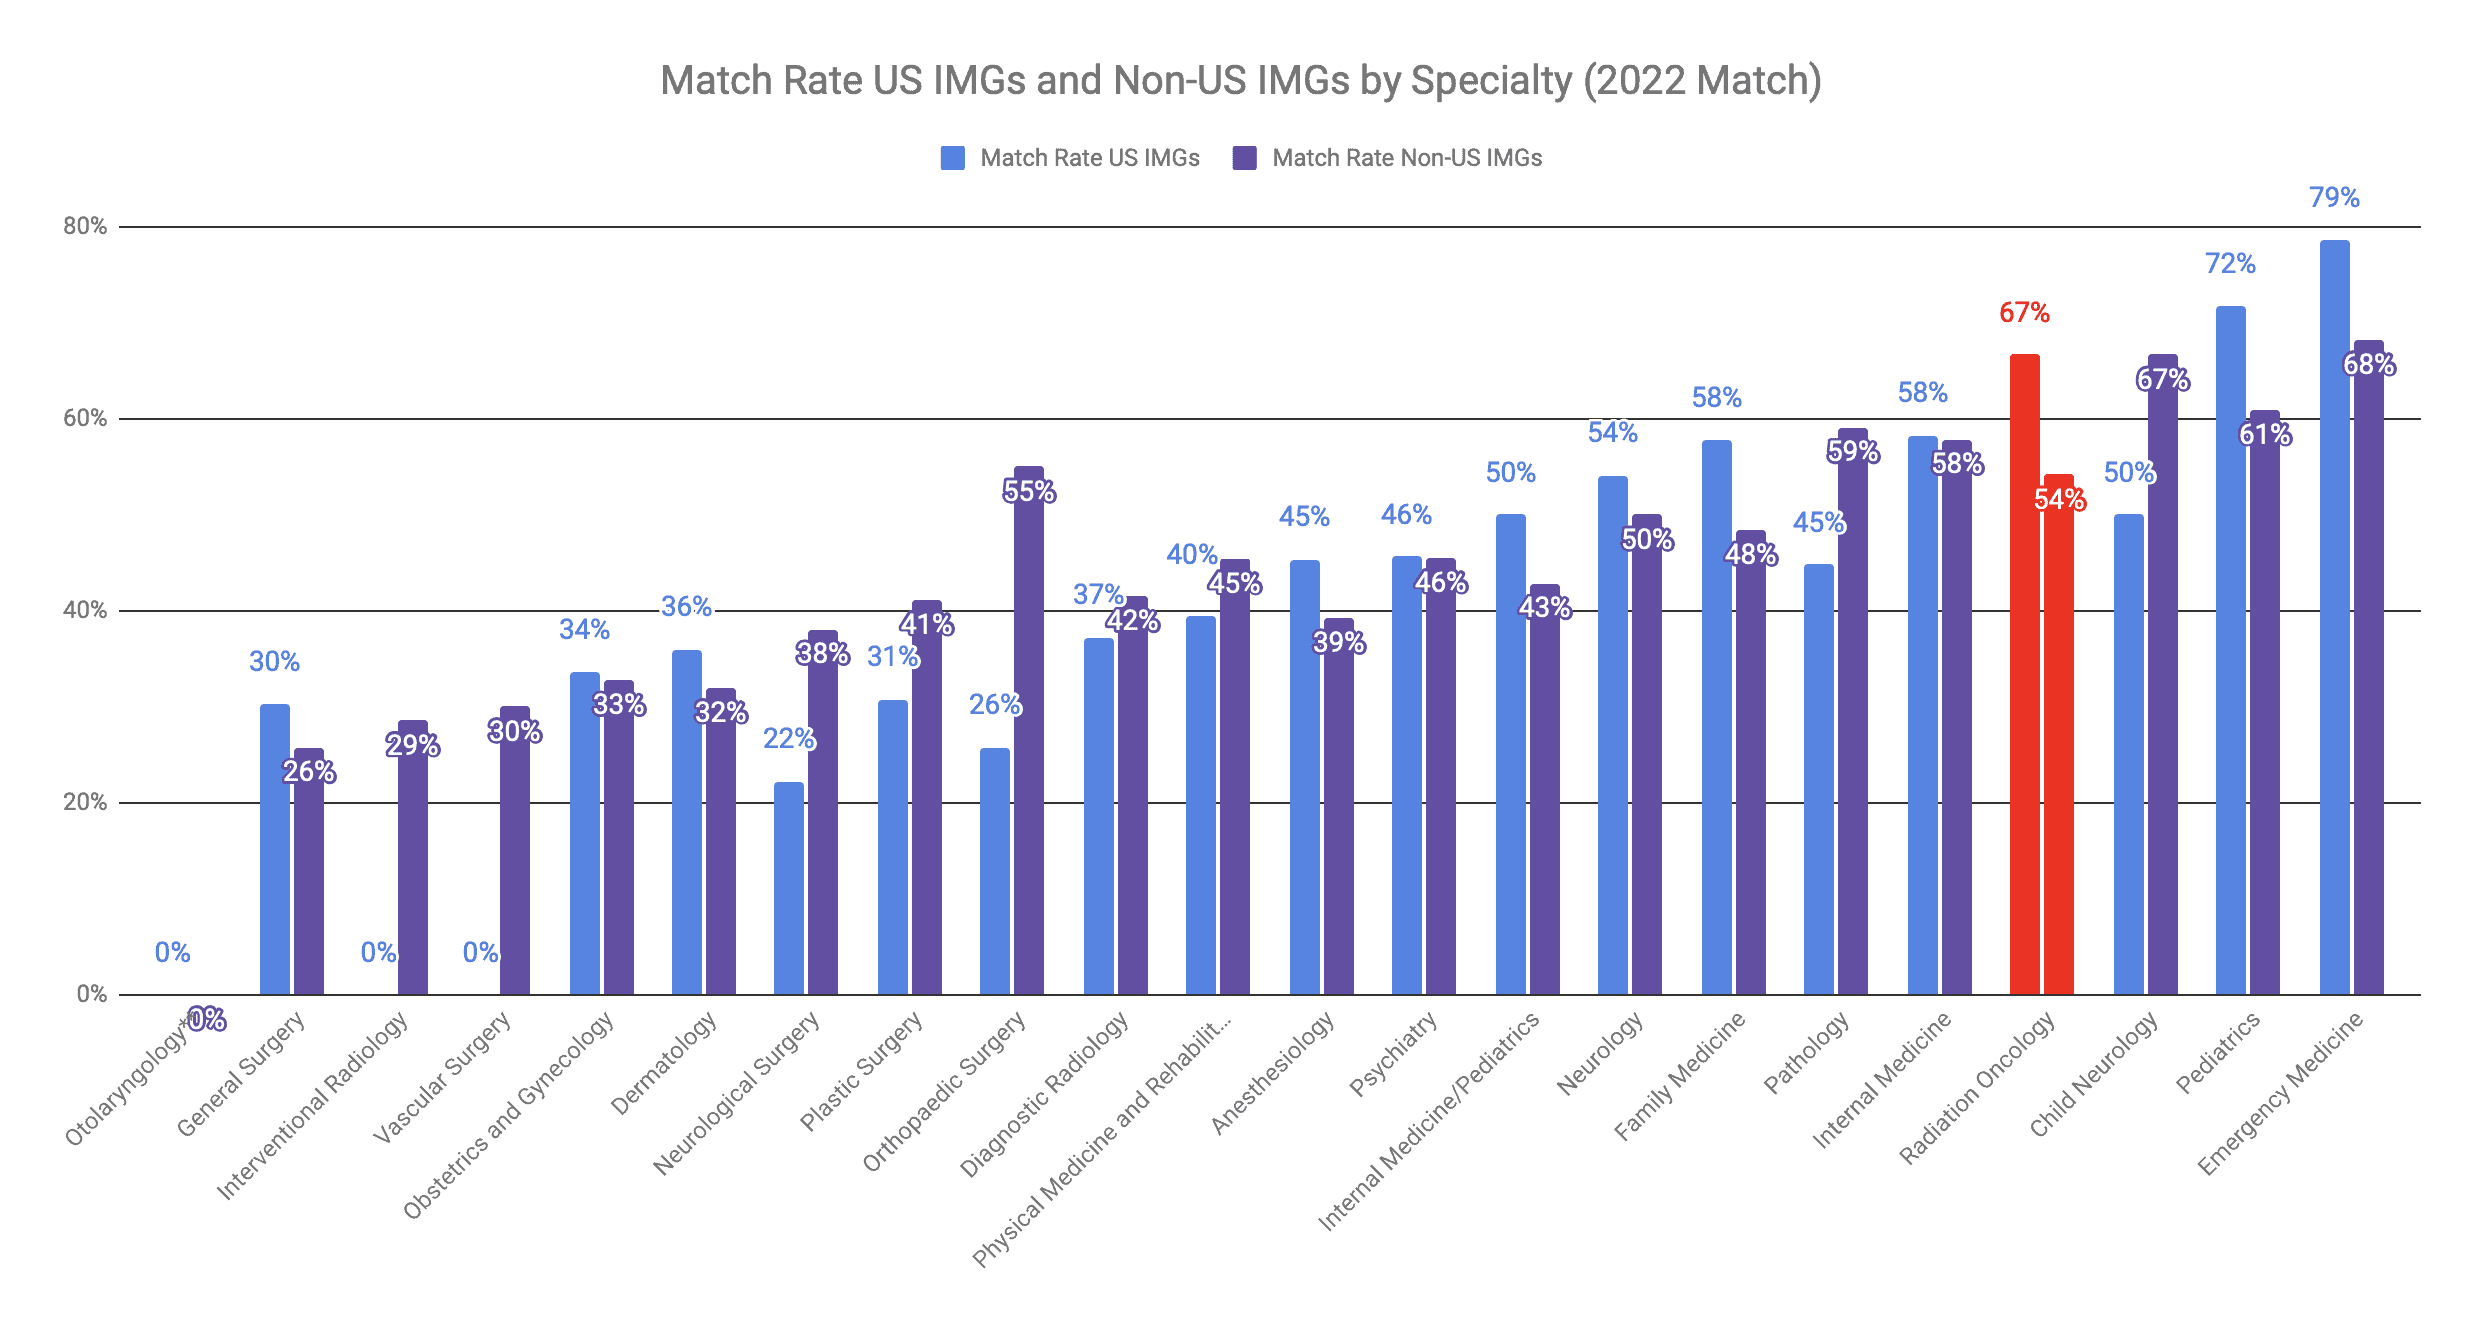 US and Non-US IMG Match Rate 2022 Match